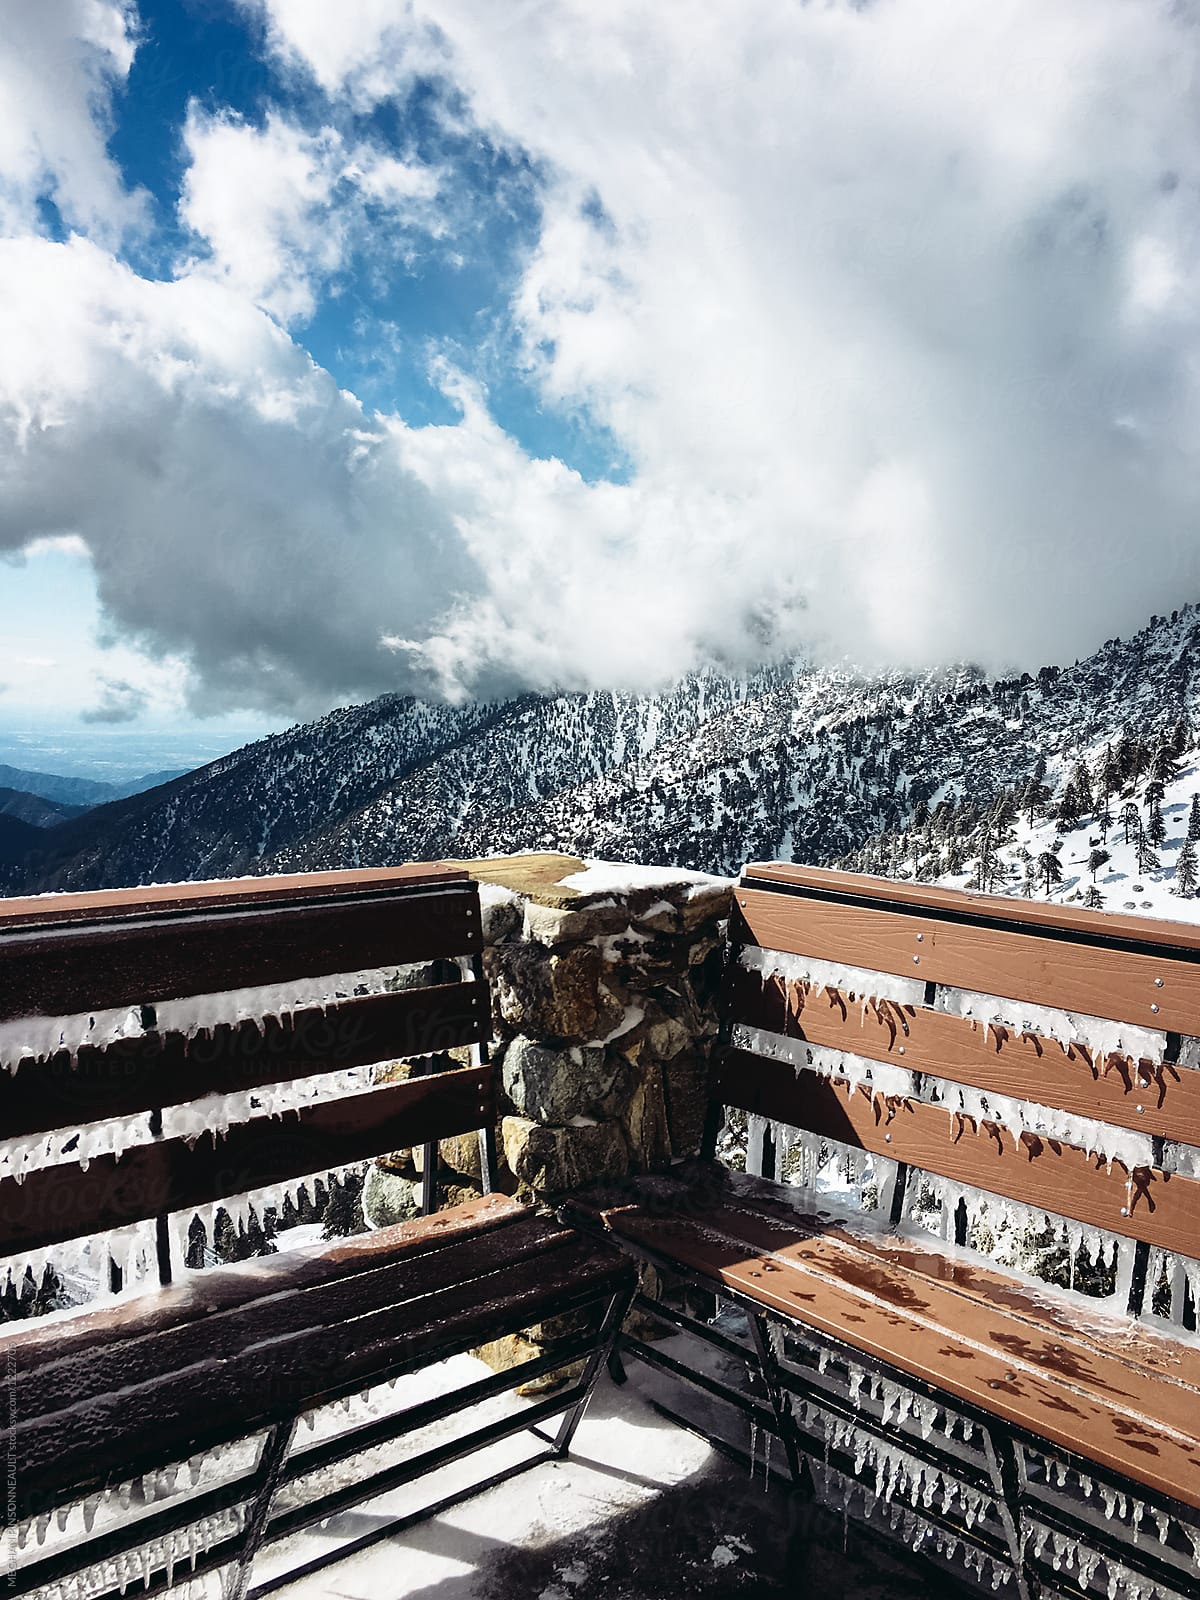 Icy Bench with Beautiful Snowy Mountain View